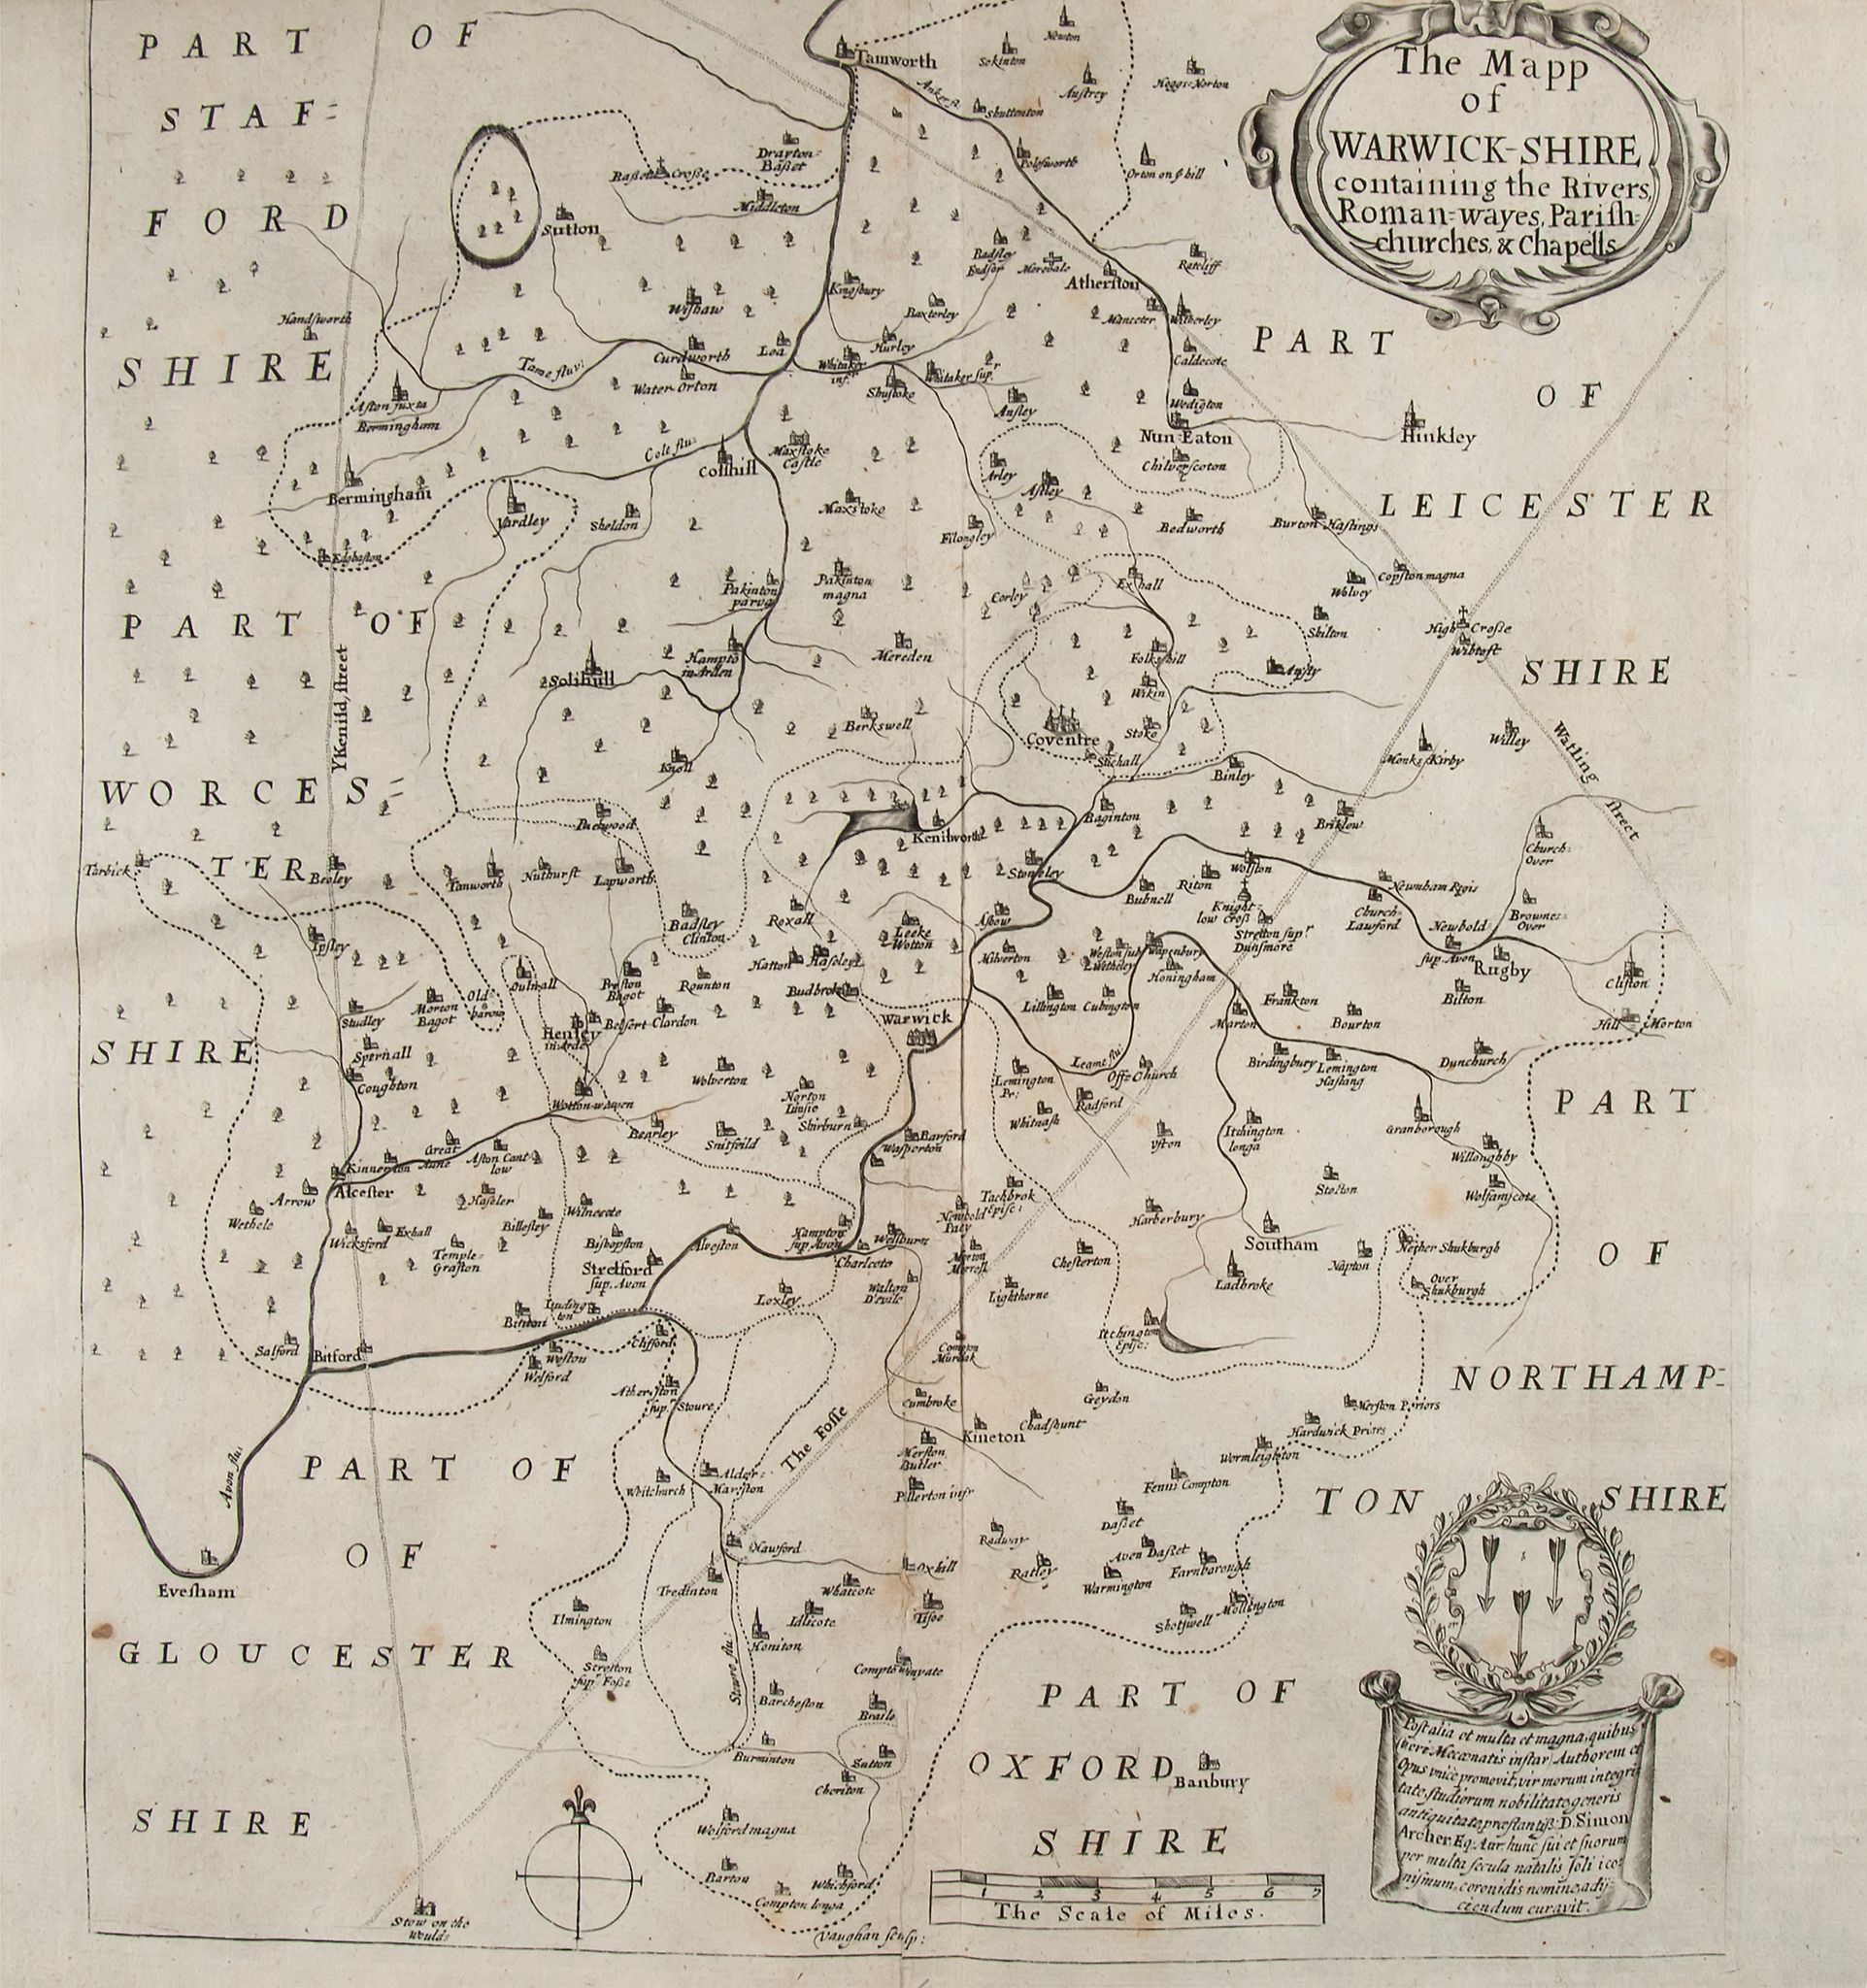 Warwickshire.- Dugdale (William) - The Antiquities of Warwickshire,  first edition ,  engraved